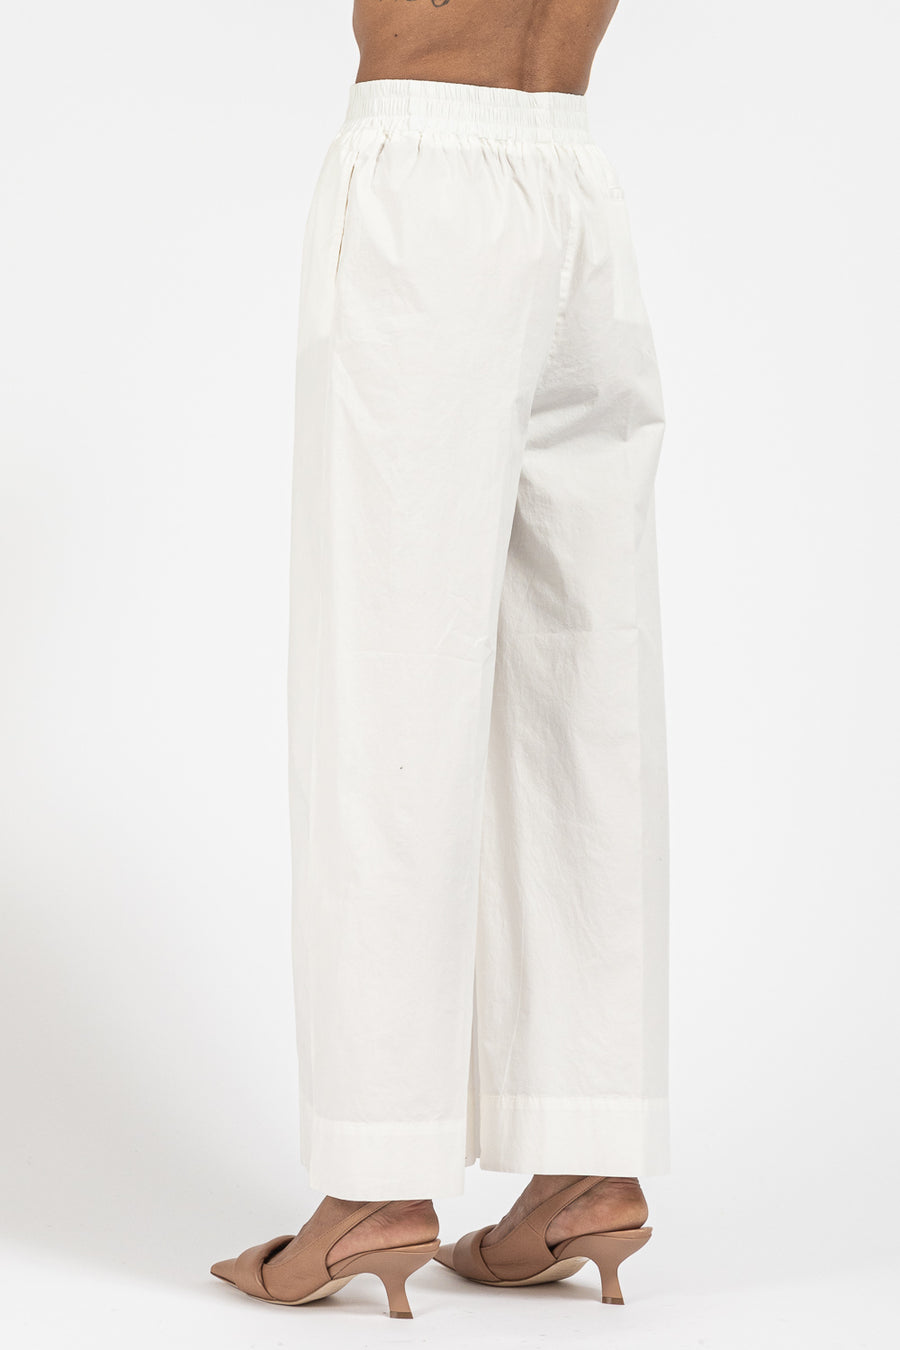 Pantalone True NYC in cotone color ivory baloon